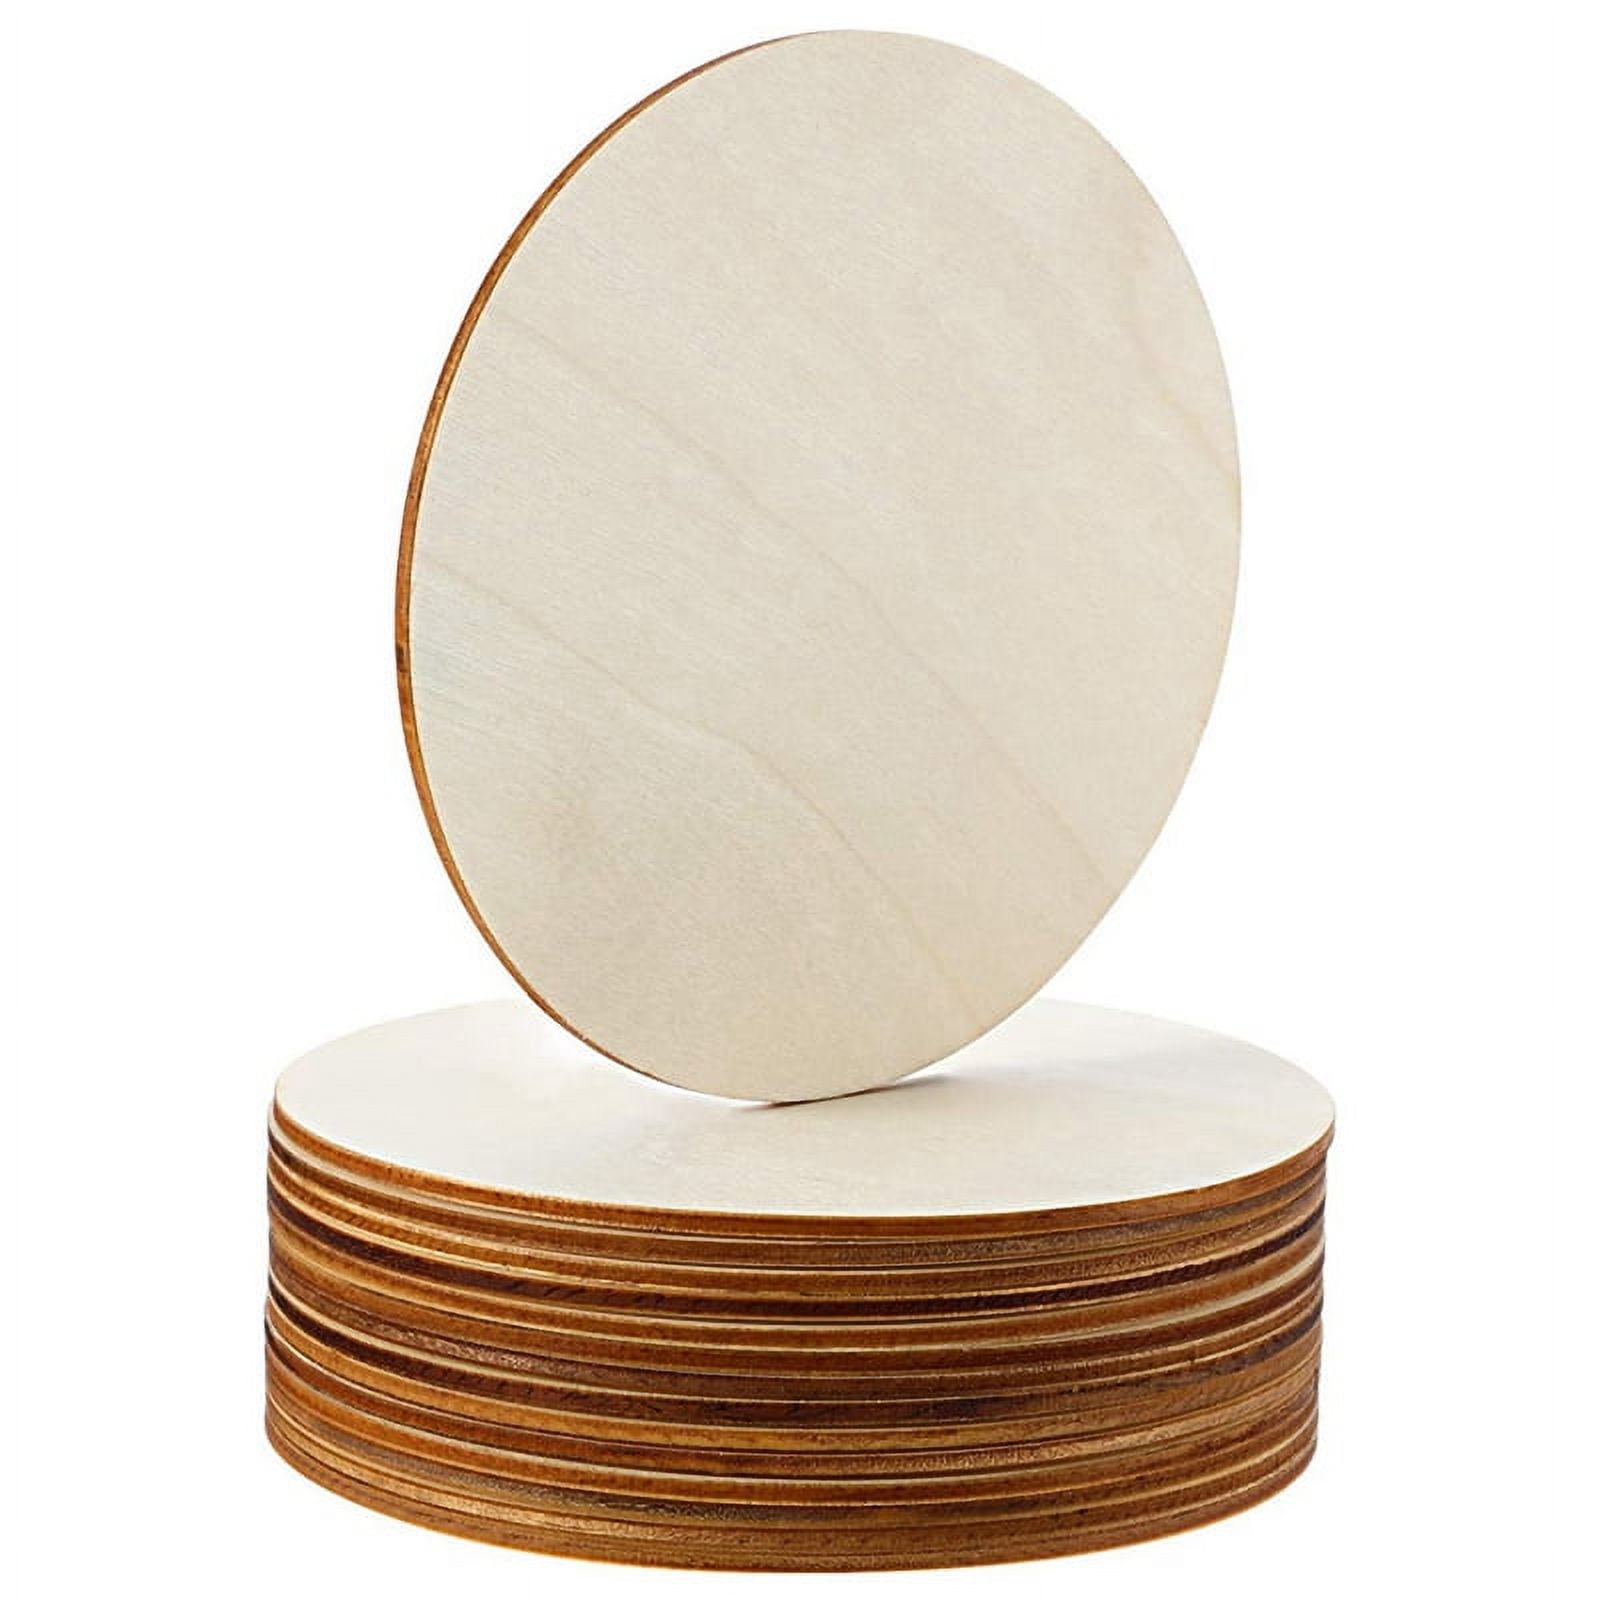 3 Pieces 12inch Wood Circles for Crafts, Unfinished Blank Wooden Round  Circle, Natural Wood Slices for DIY, Painting, Home, Party, Holiday Decor